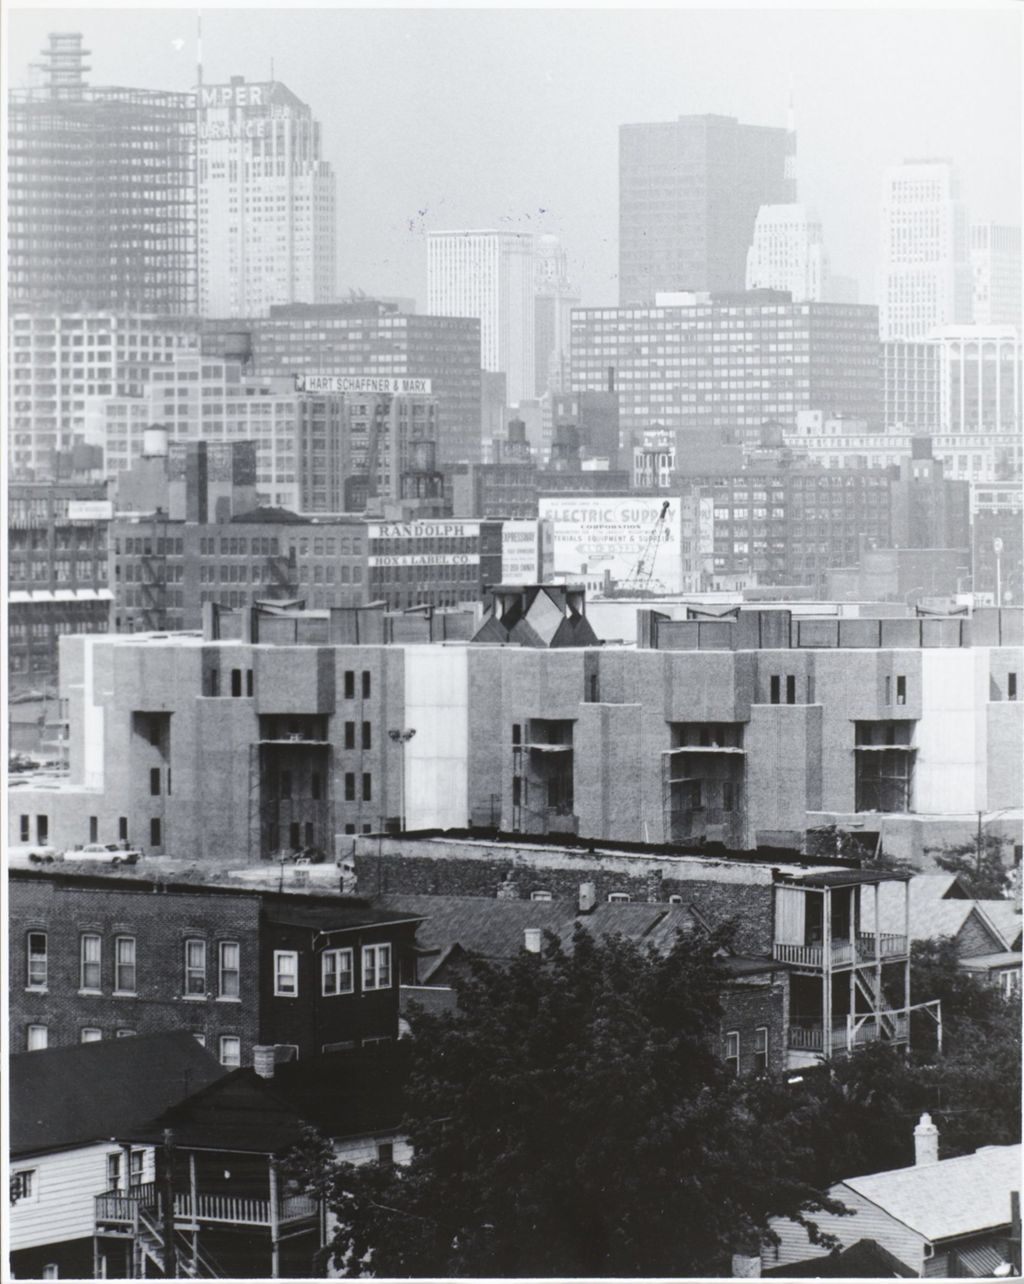 Miniature of Behavioral Sciences building with cityscape in background